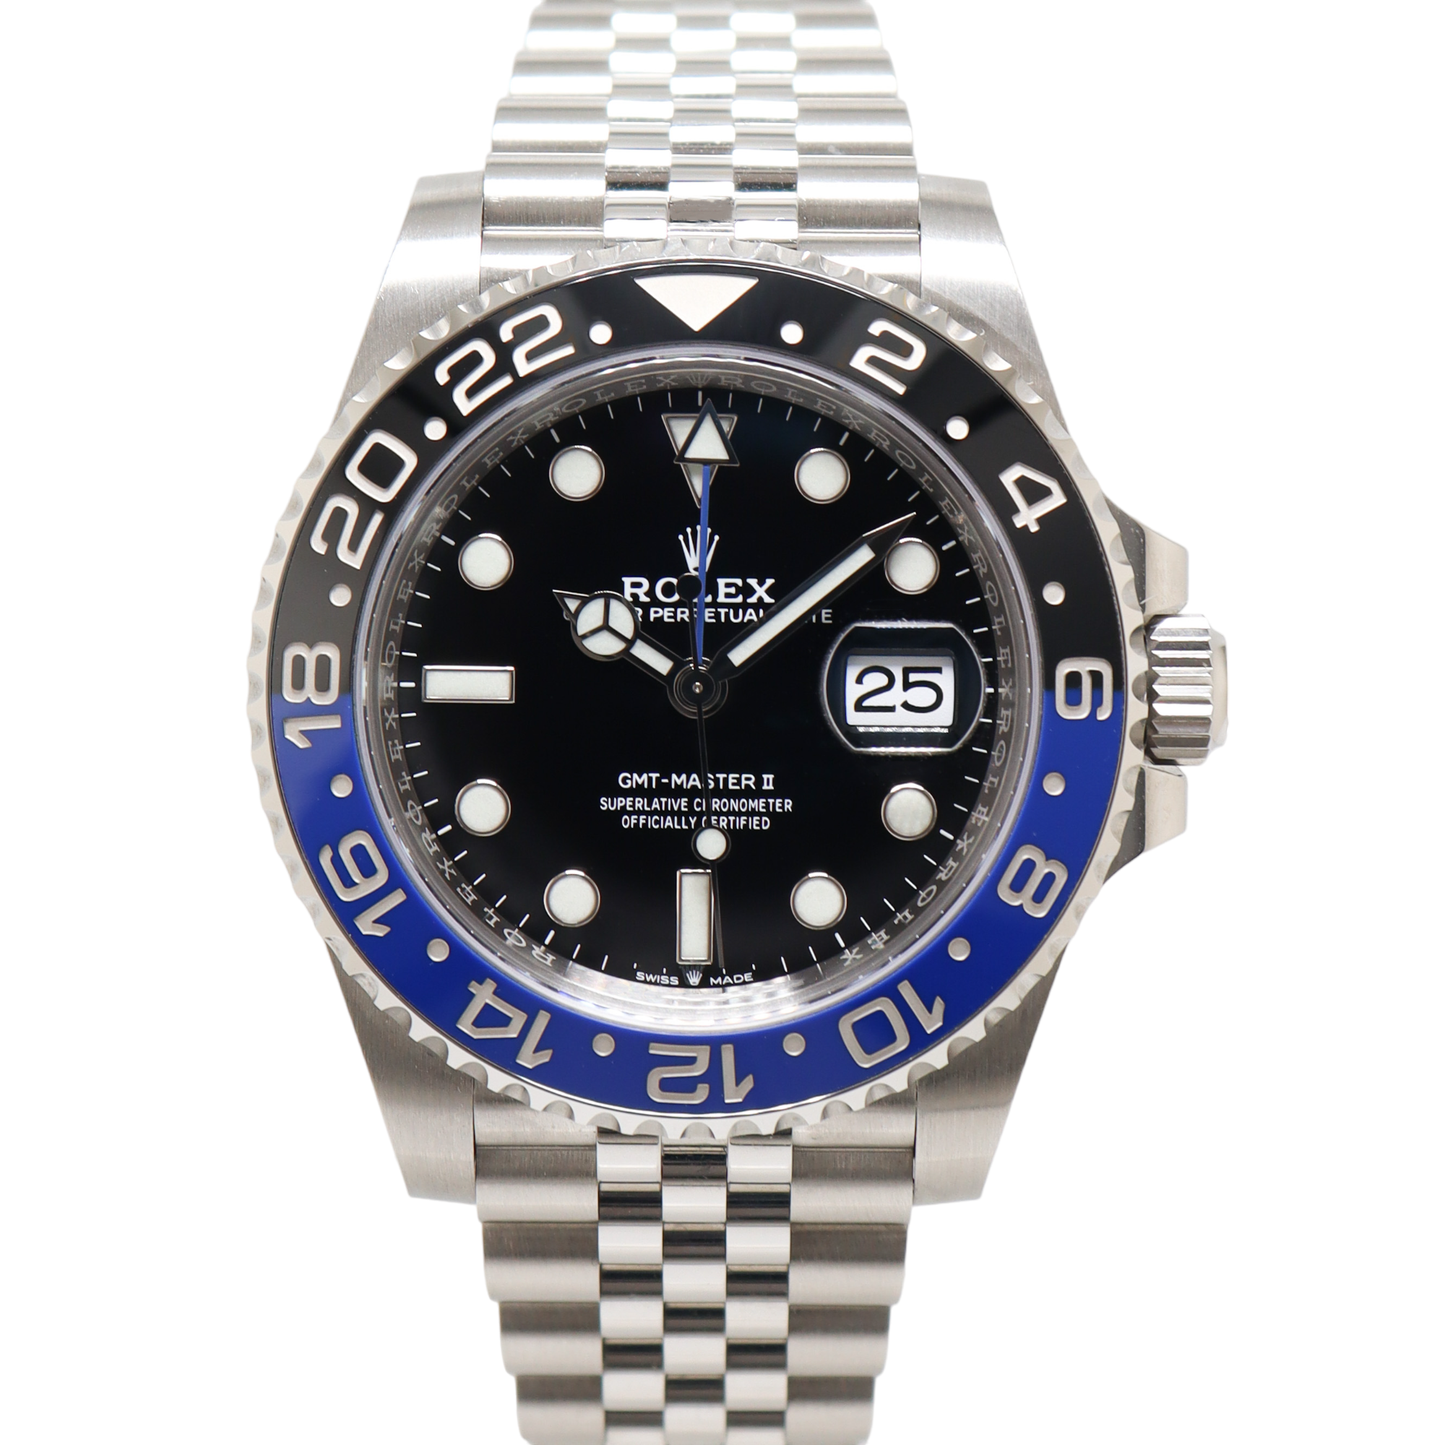 Rolex GMT Master II "Batgirl" Stainless Steel 40mm Black Dot Dial Watch Reference# 126710BLNR